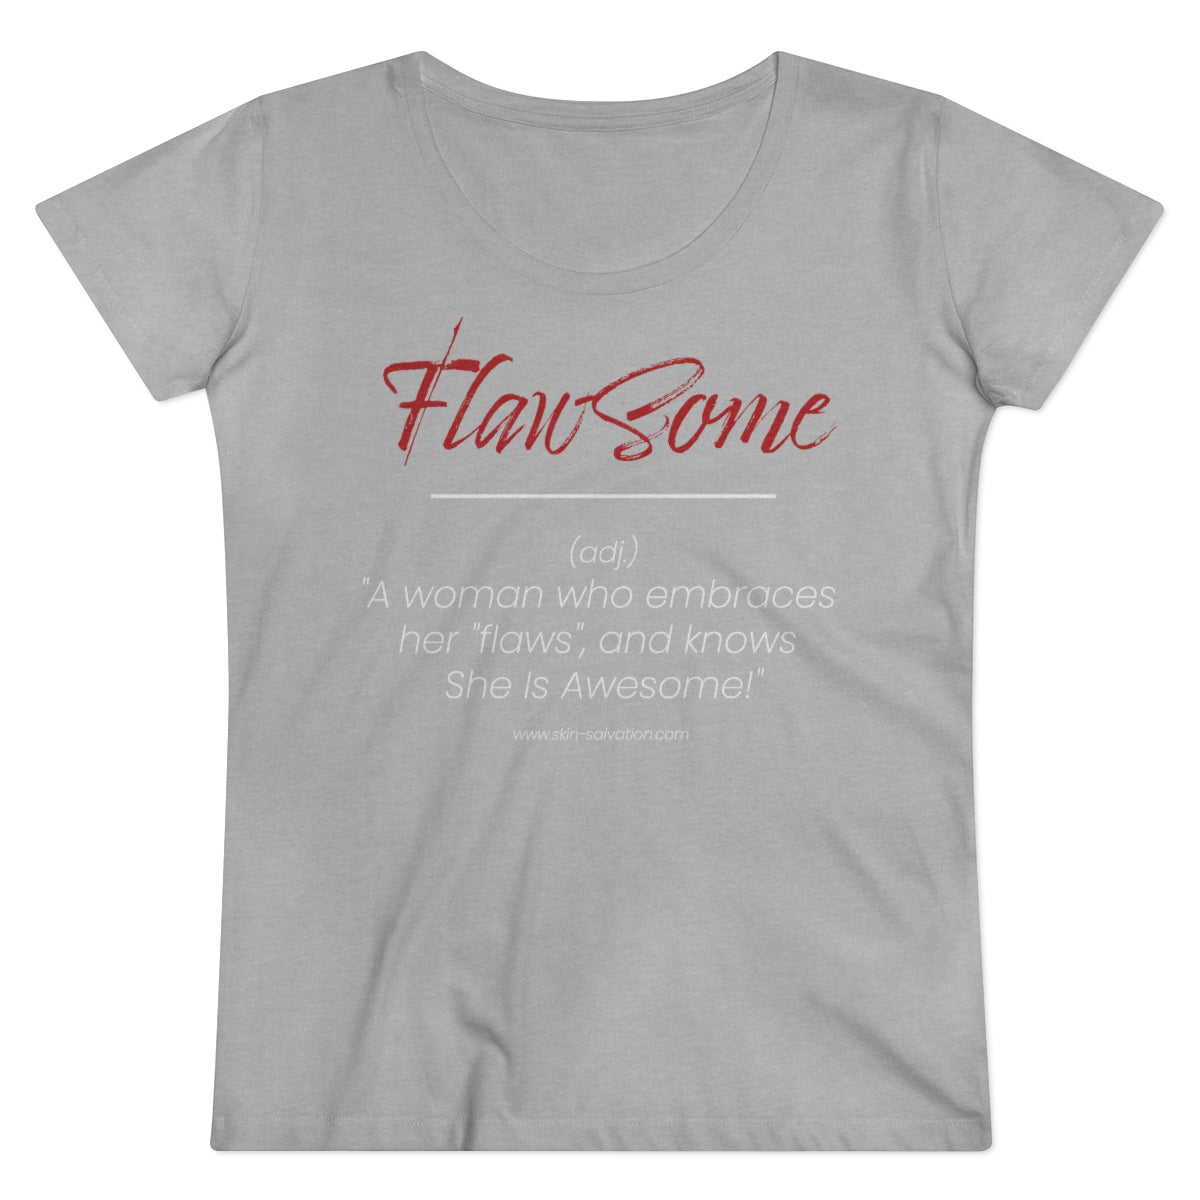 Skin Salvation "Flawsome" Scooped Neck T-shirt